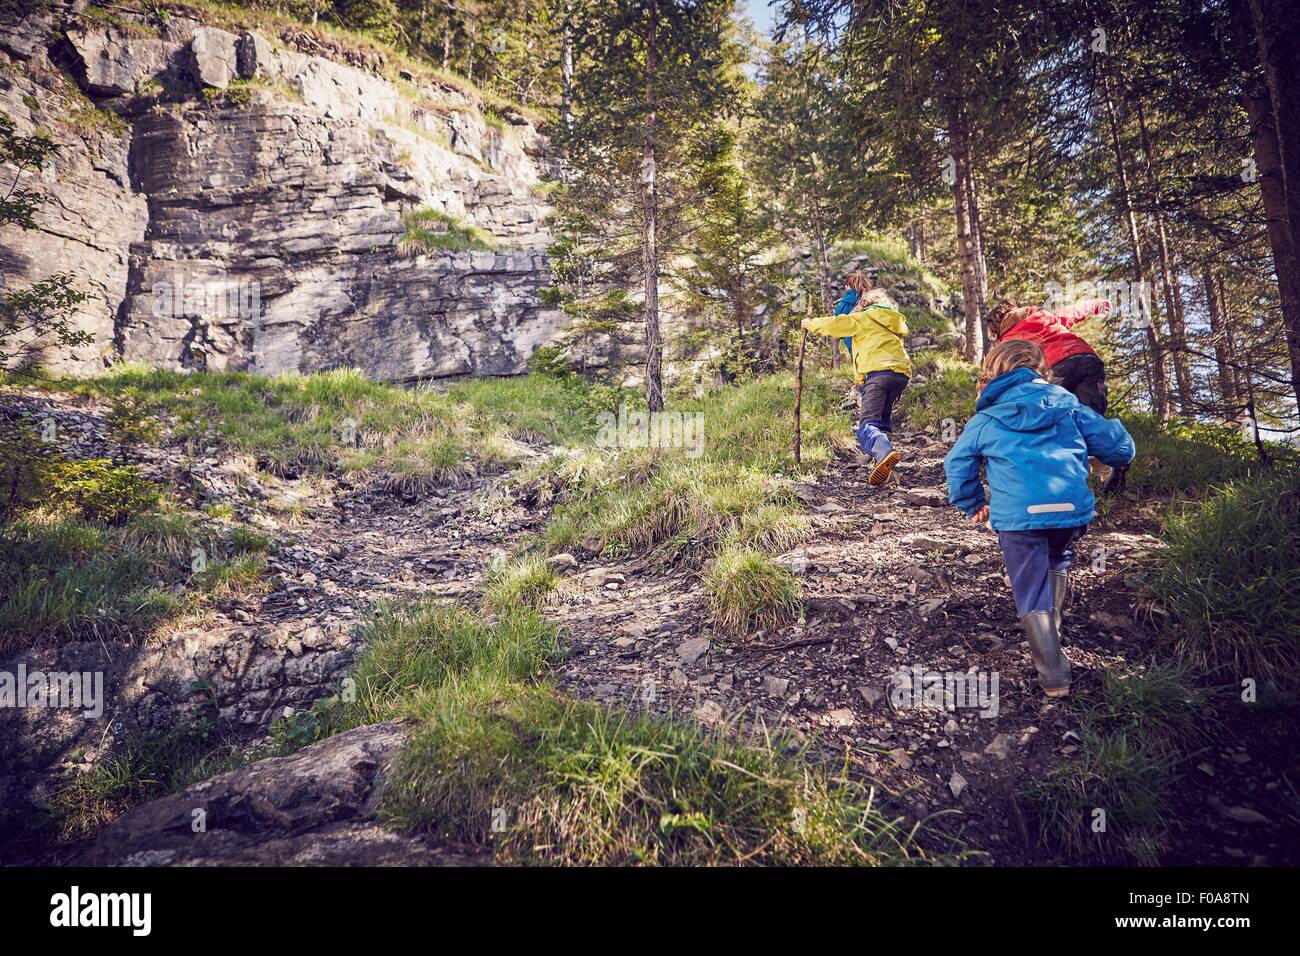 Group of children in forest, walking uphill, rear view Stock Photo